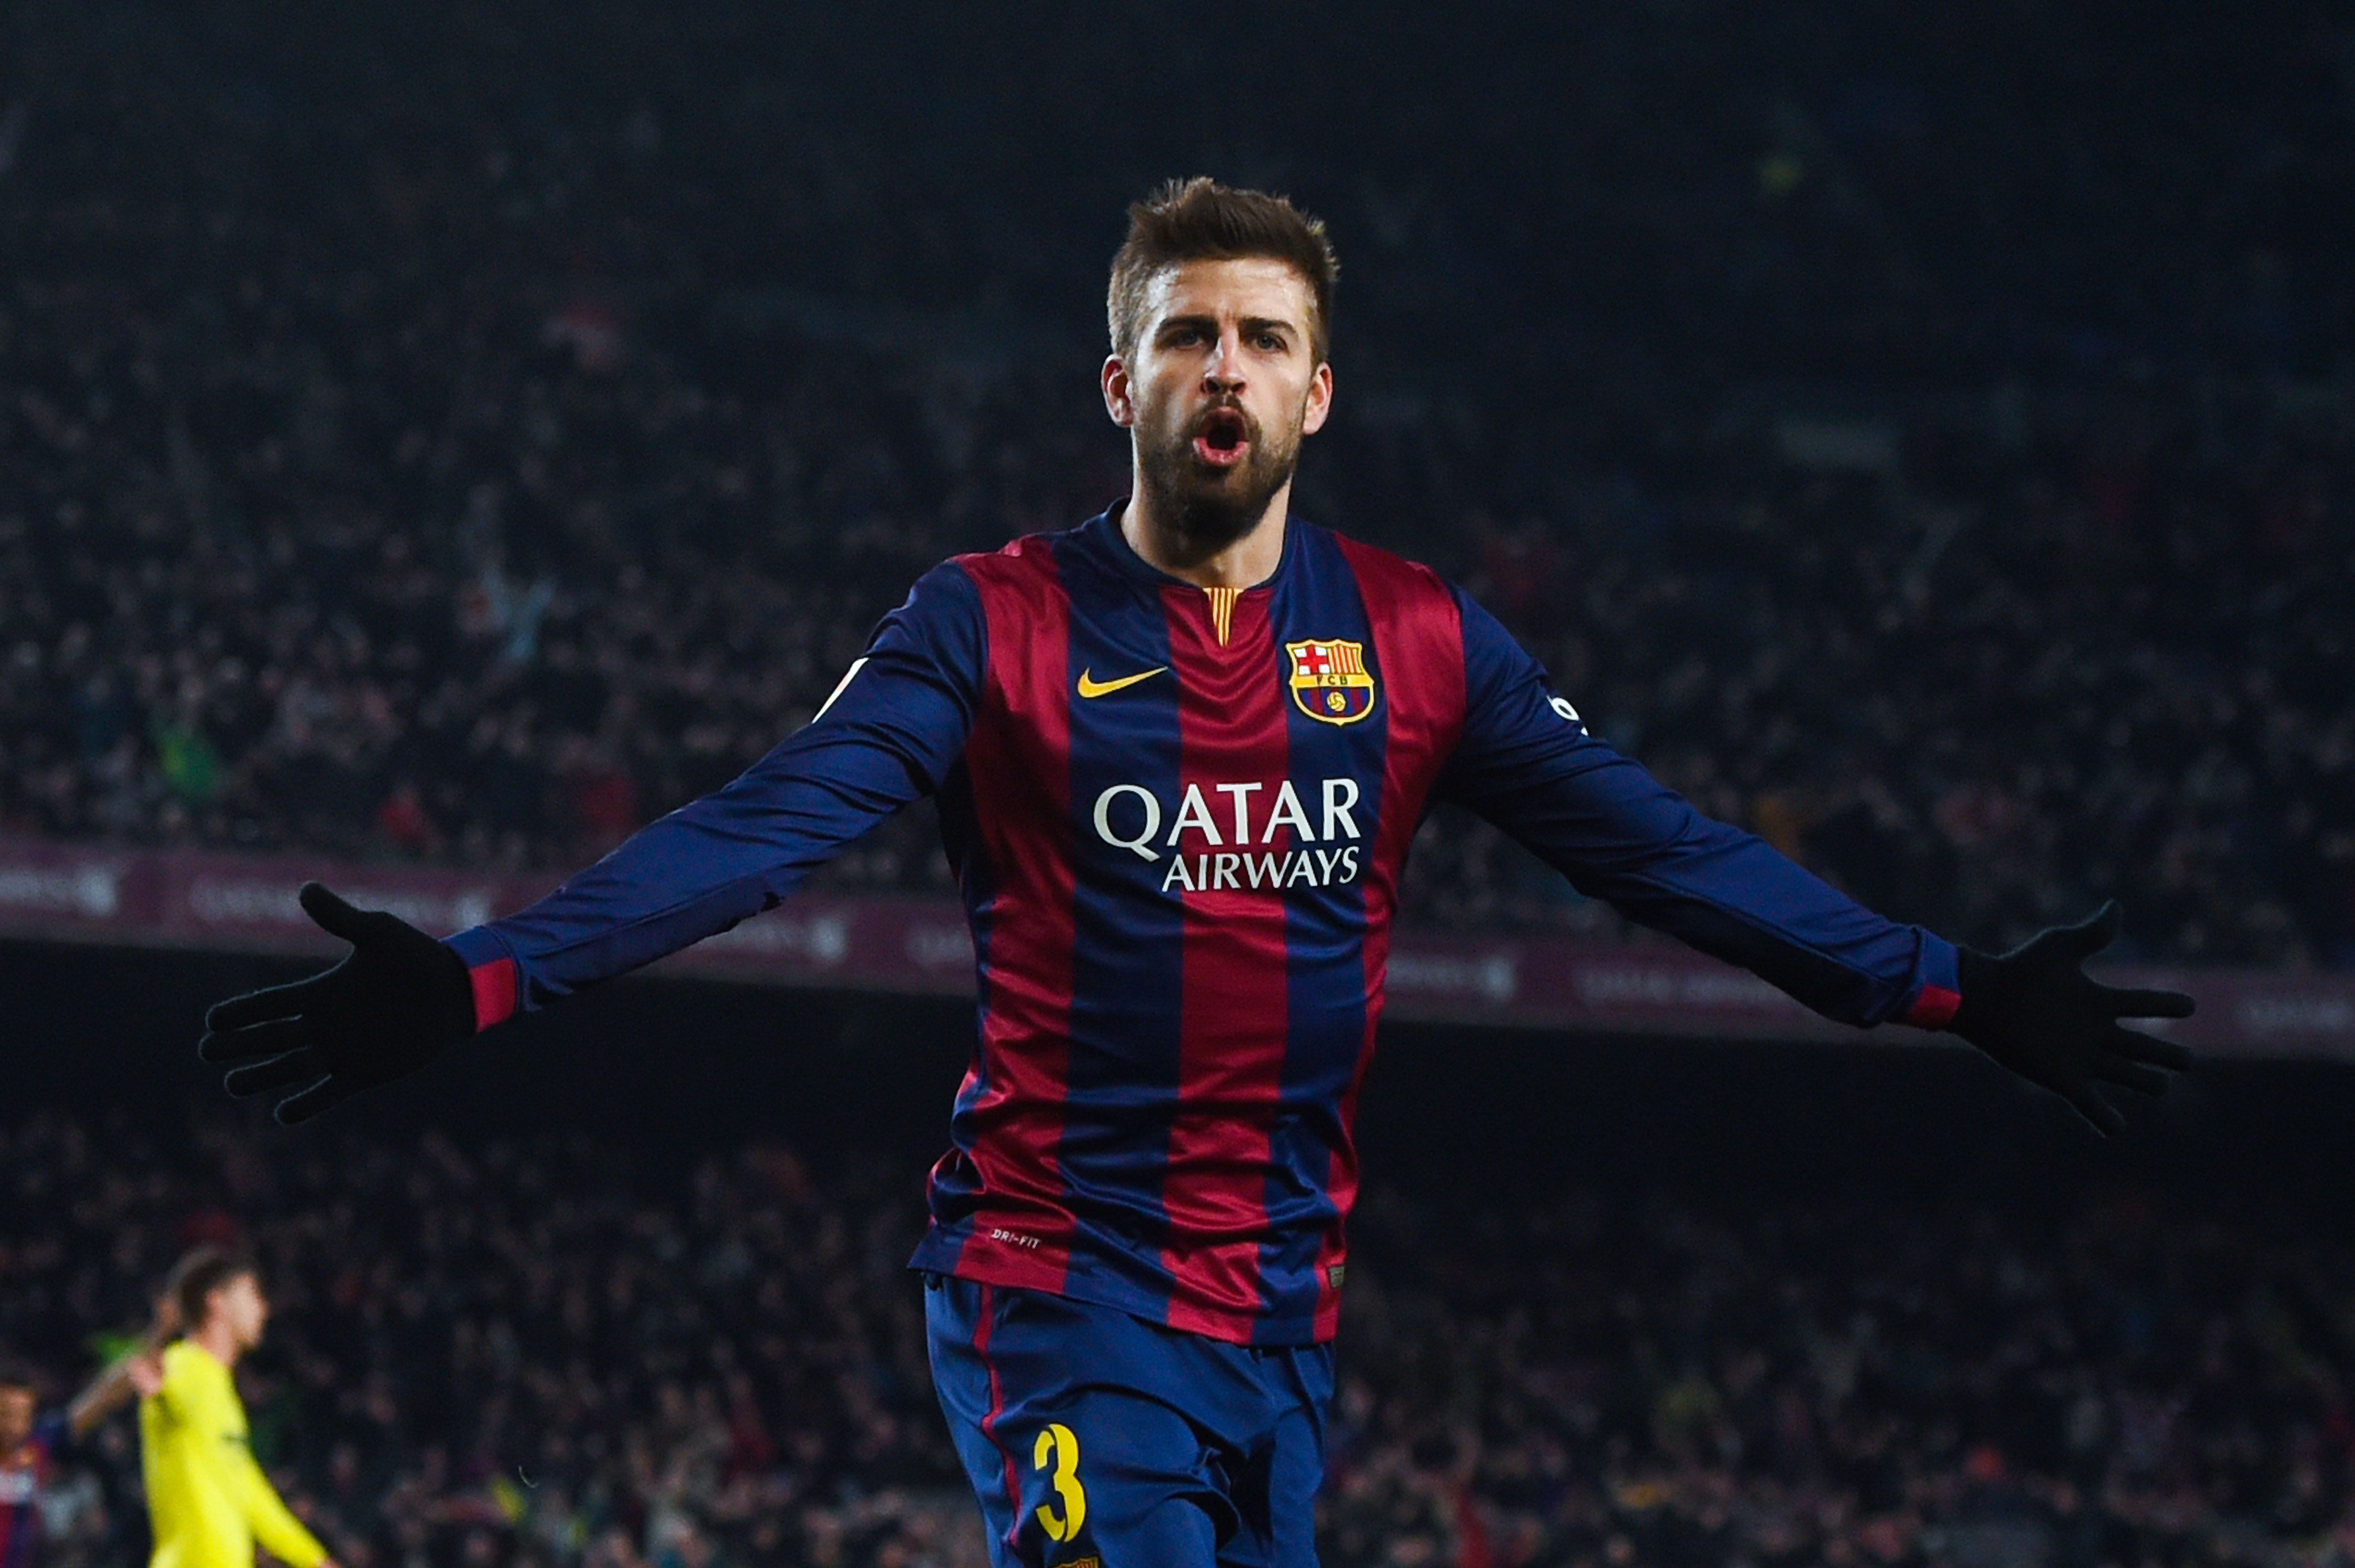 Gerard Pique celebrates after scoring for Barcelona against Villarreal in the Copa del Rey in February 2015.